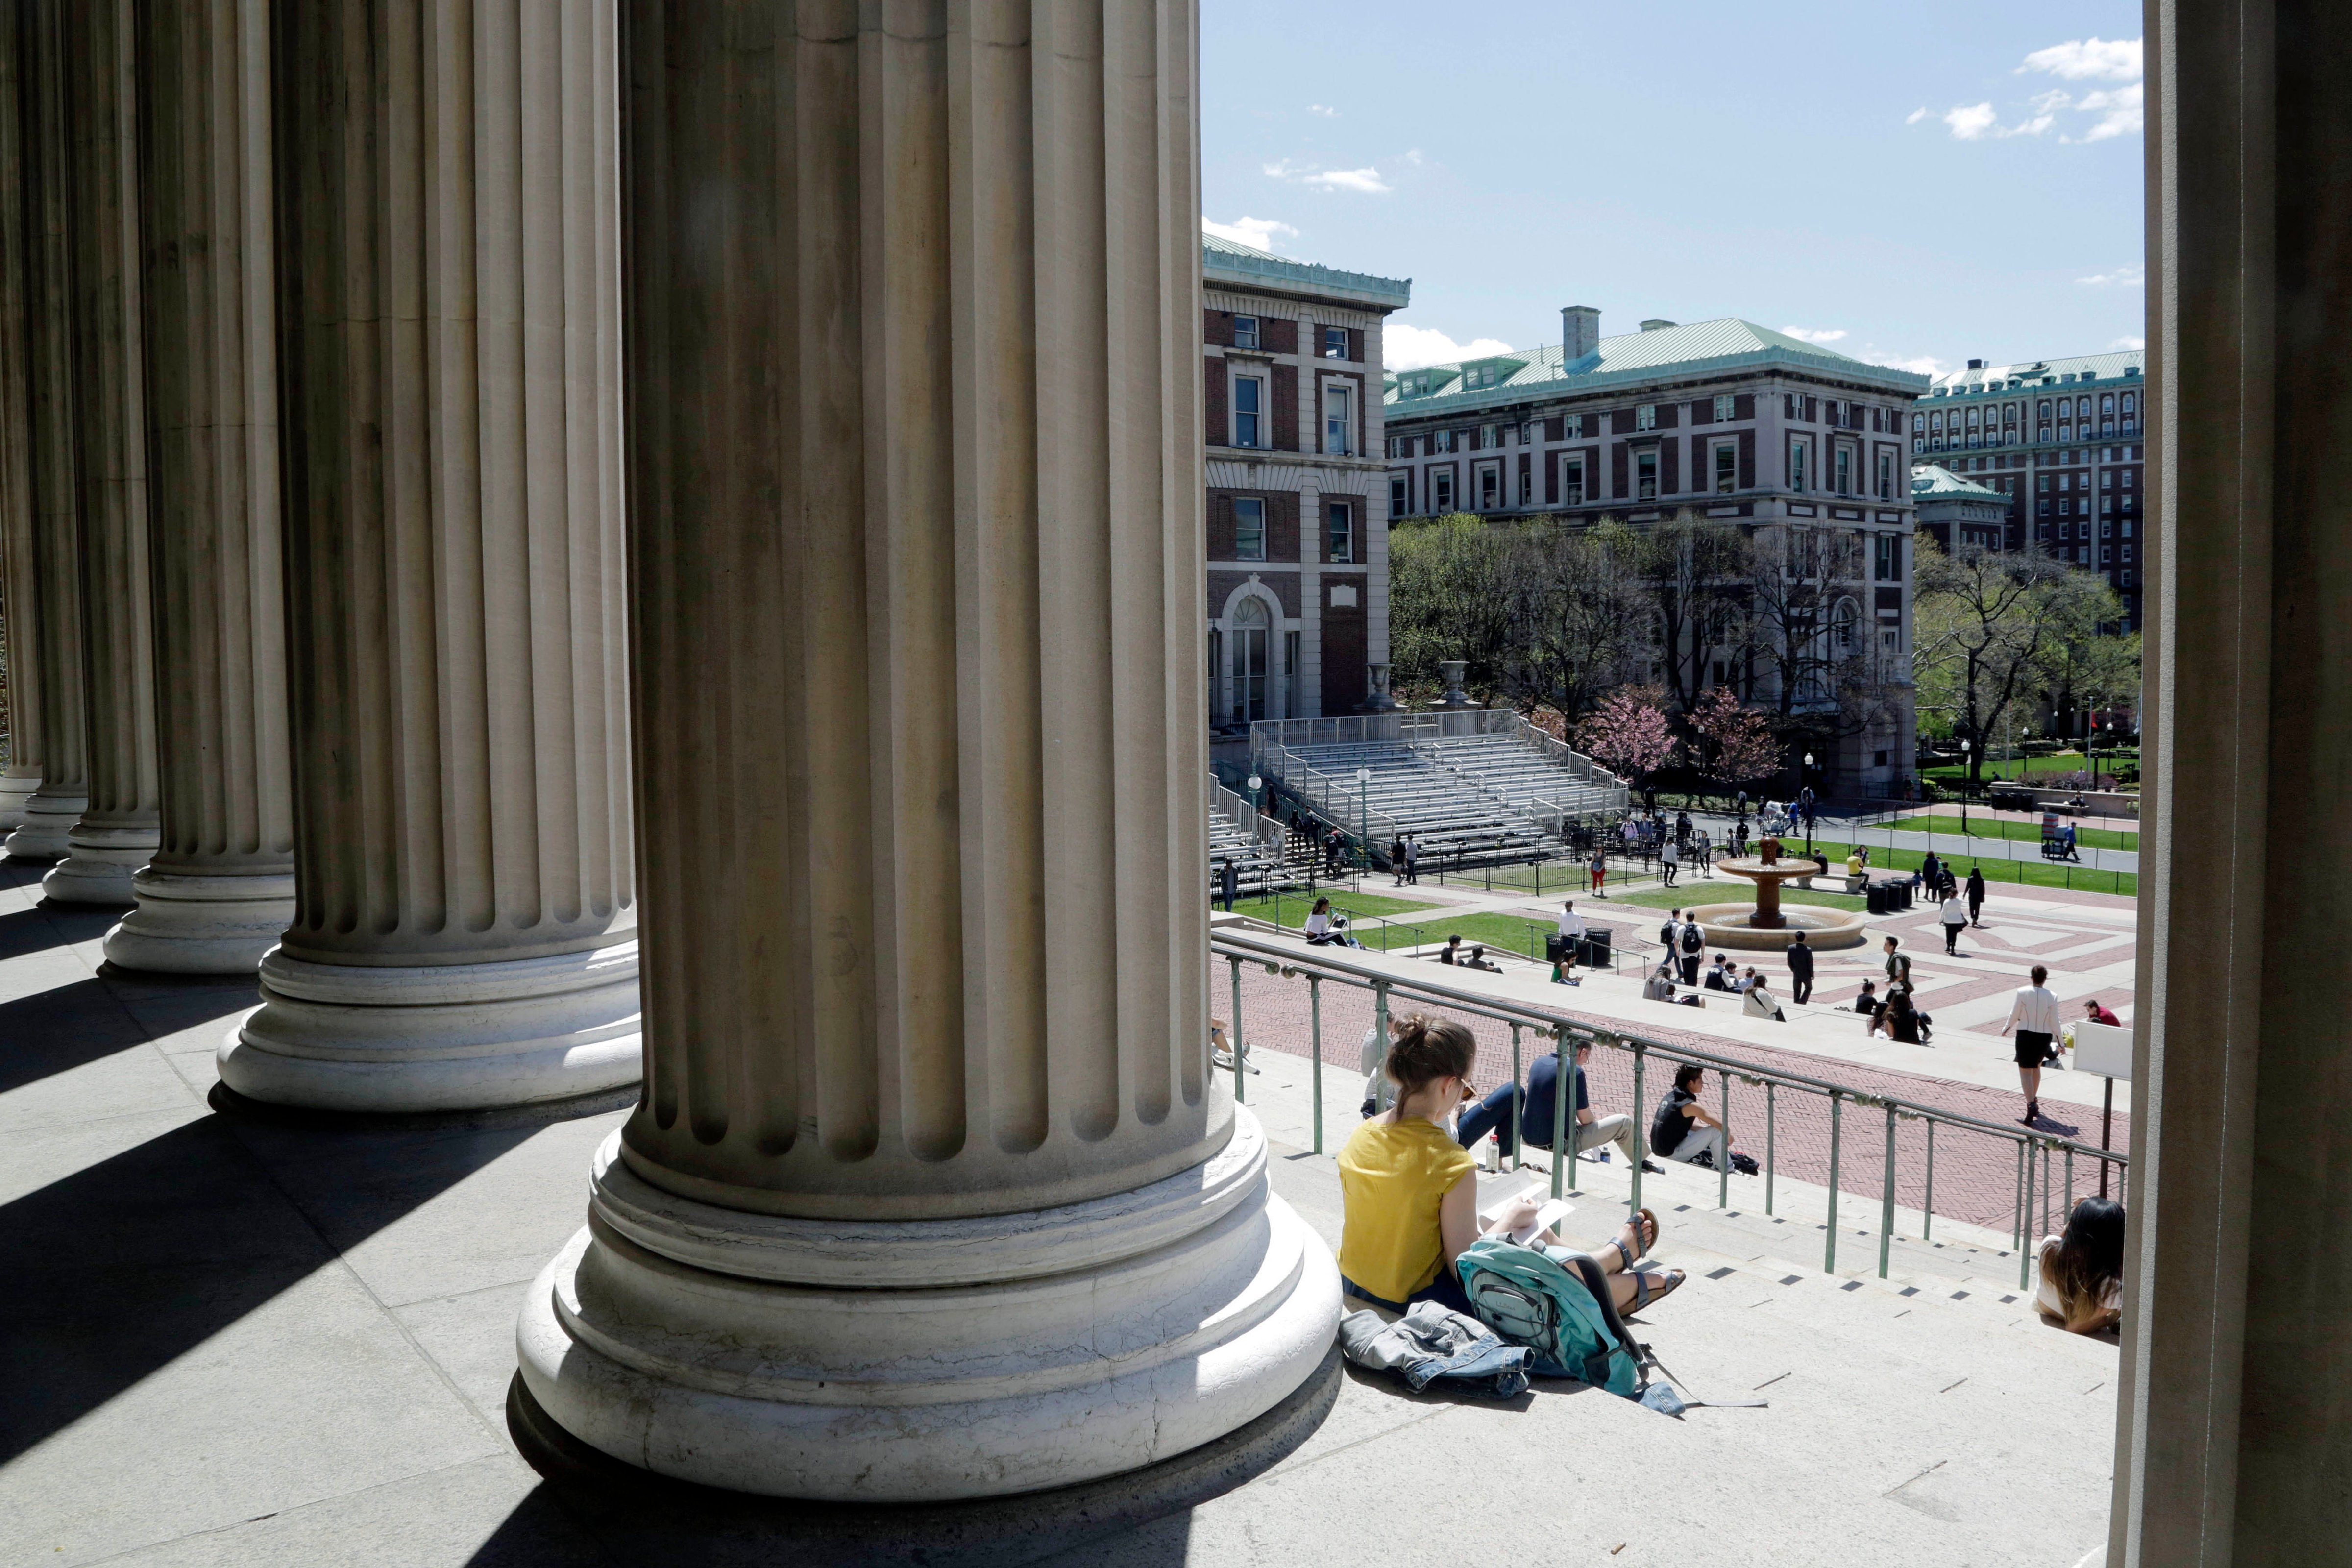 Students at Columbia University in New York, April 29, 2015.